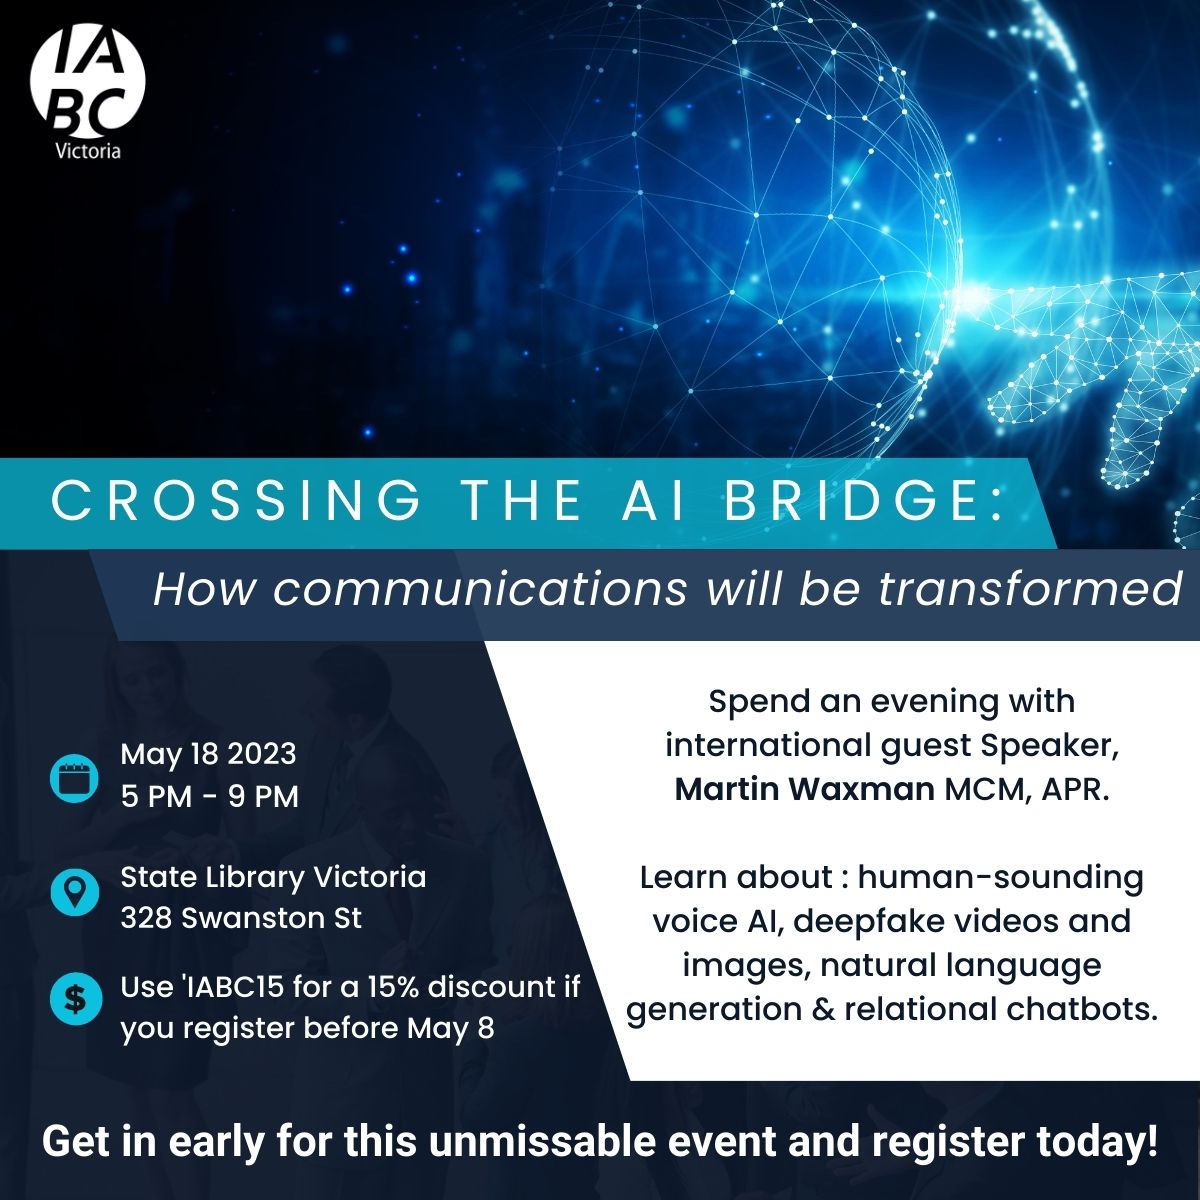 Get in early for what is sure to be an unmissable event with special guest Martin Waxman, MCM, APR, who will discuss the latest AI trends and how it will impact communications. Note: The special discount code is still active! Register now: crossingtheaibridge.floktu.com